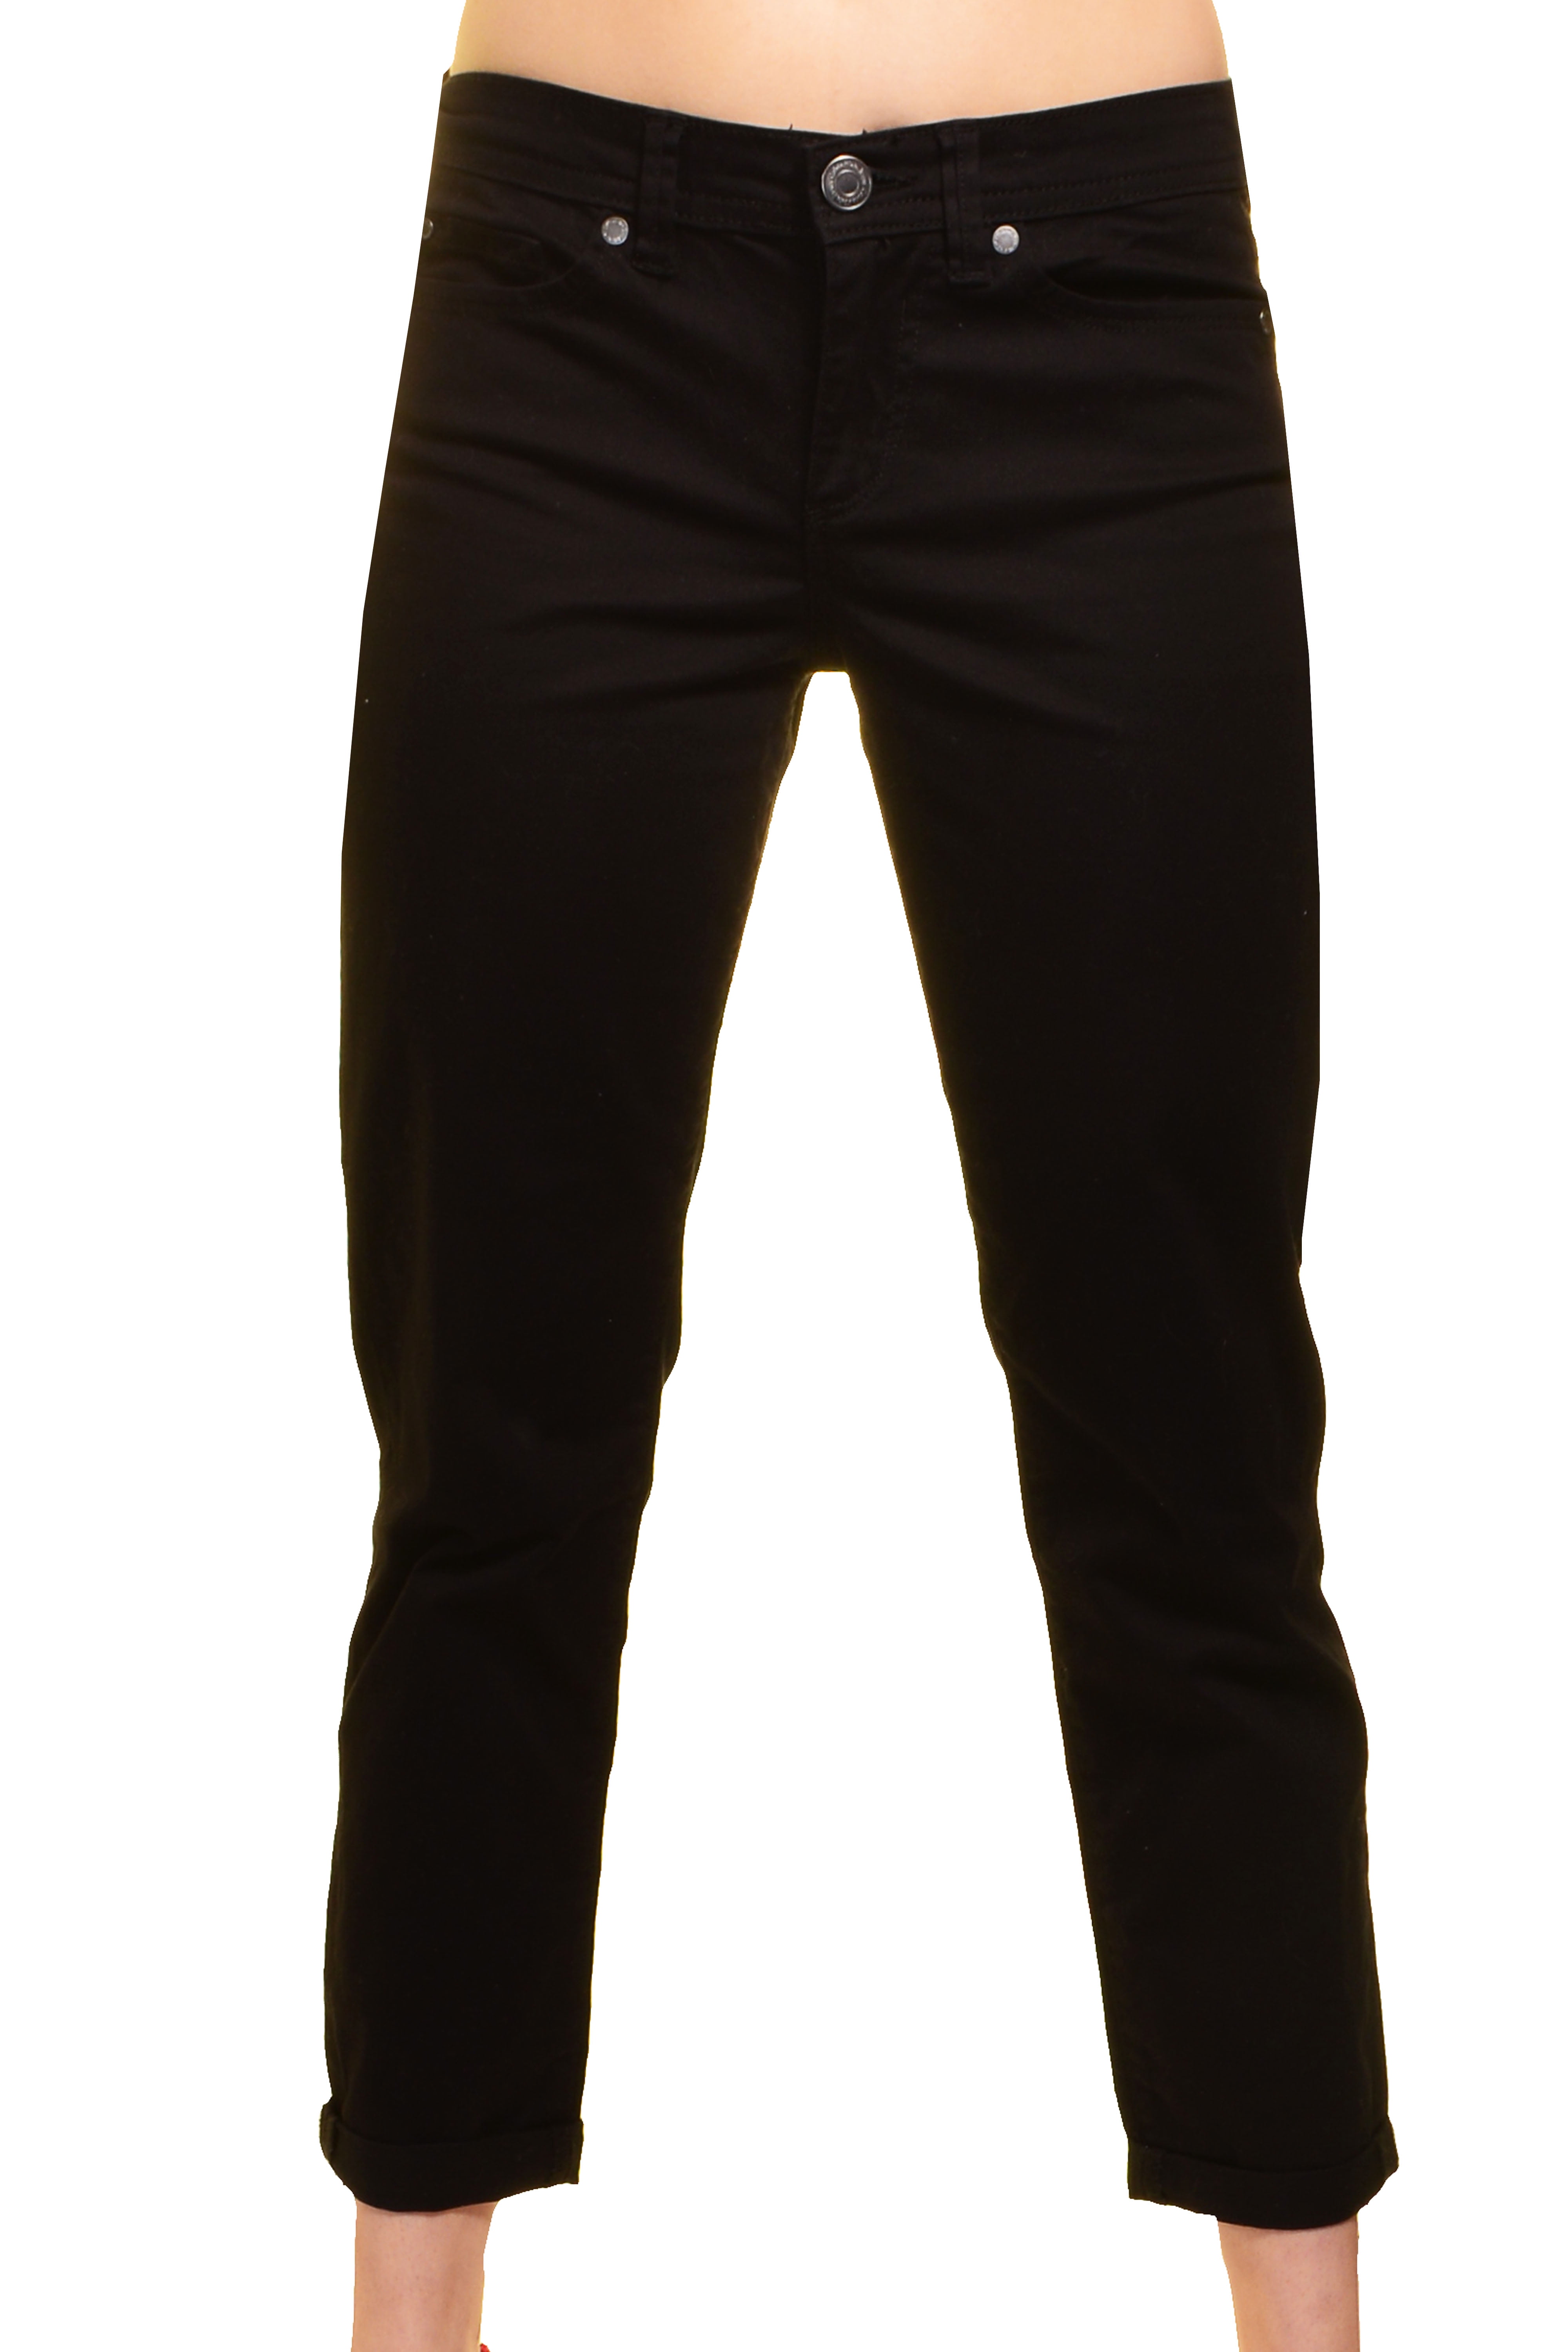 Buy Men's Charcoal Grey Power Stretch Pants Online In India